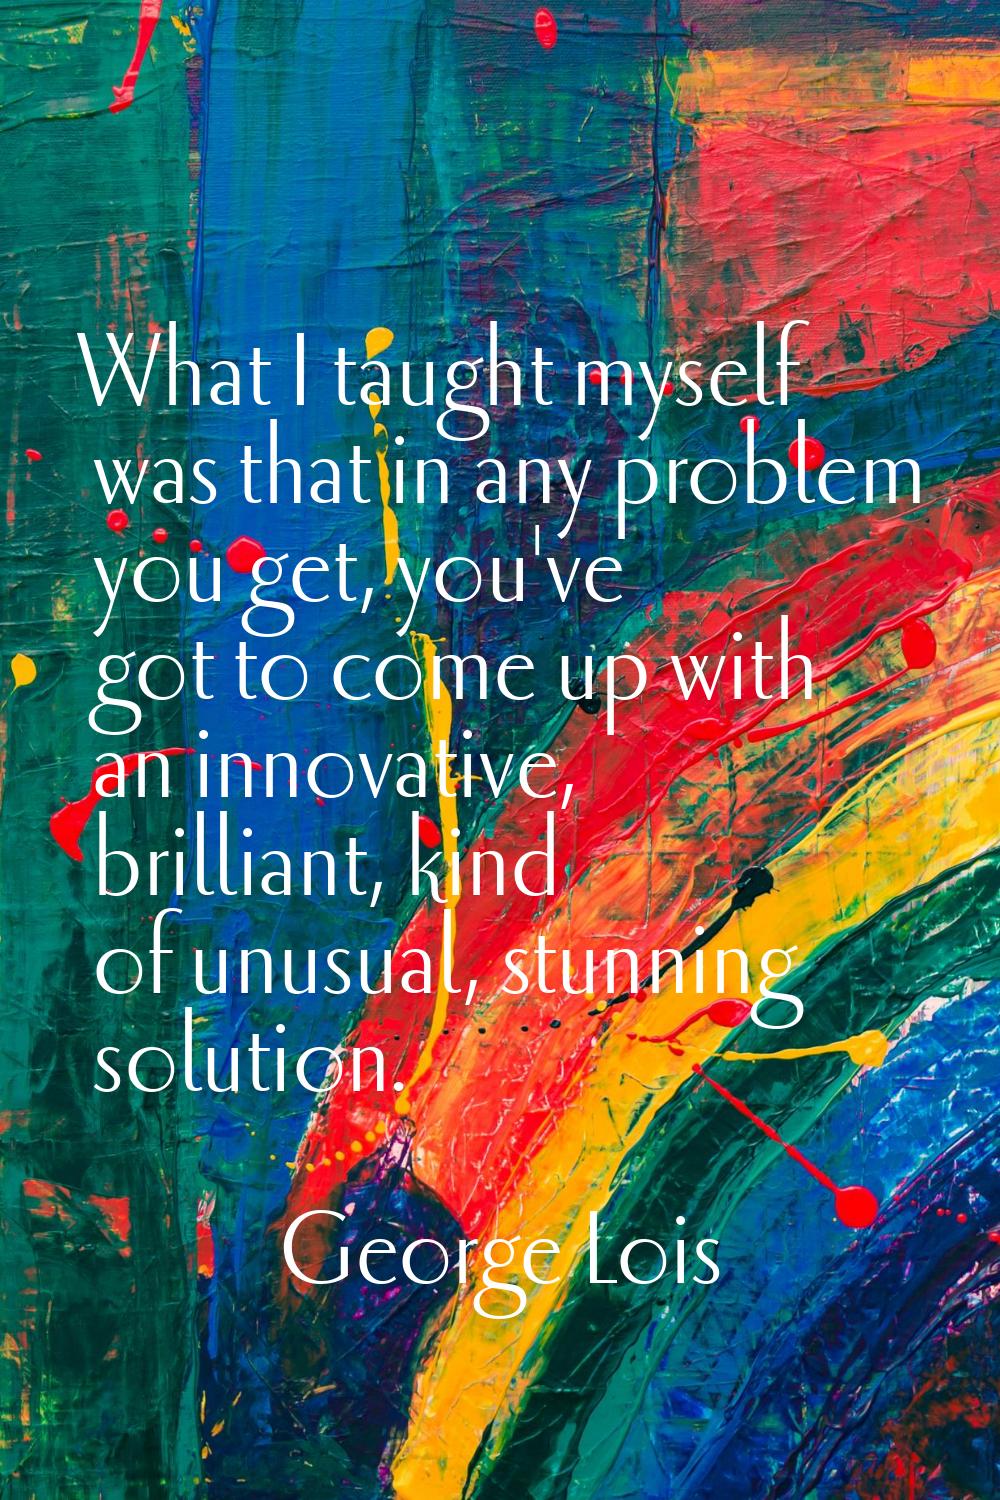 What I taught myself was that in any problem you get, you've got to come up with an innovative, bri